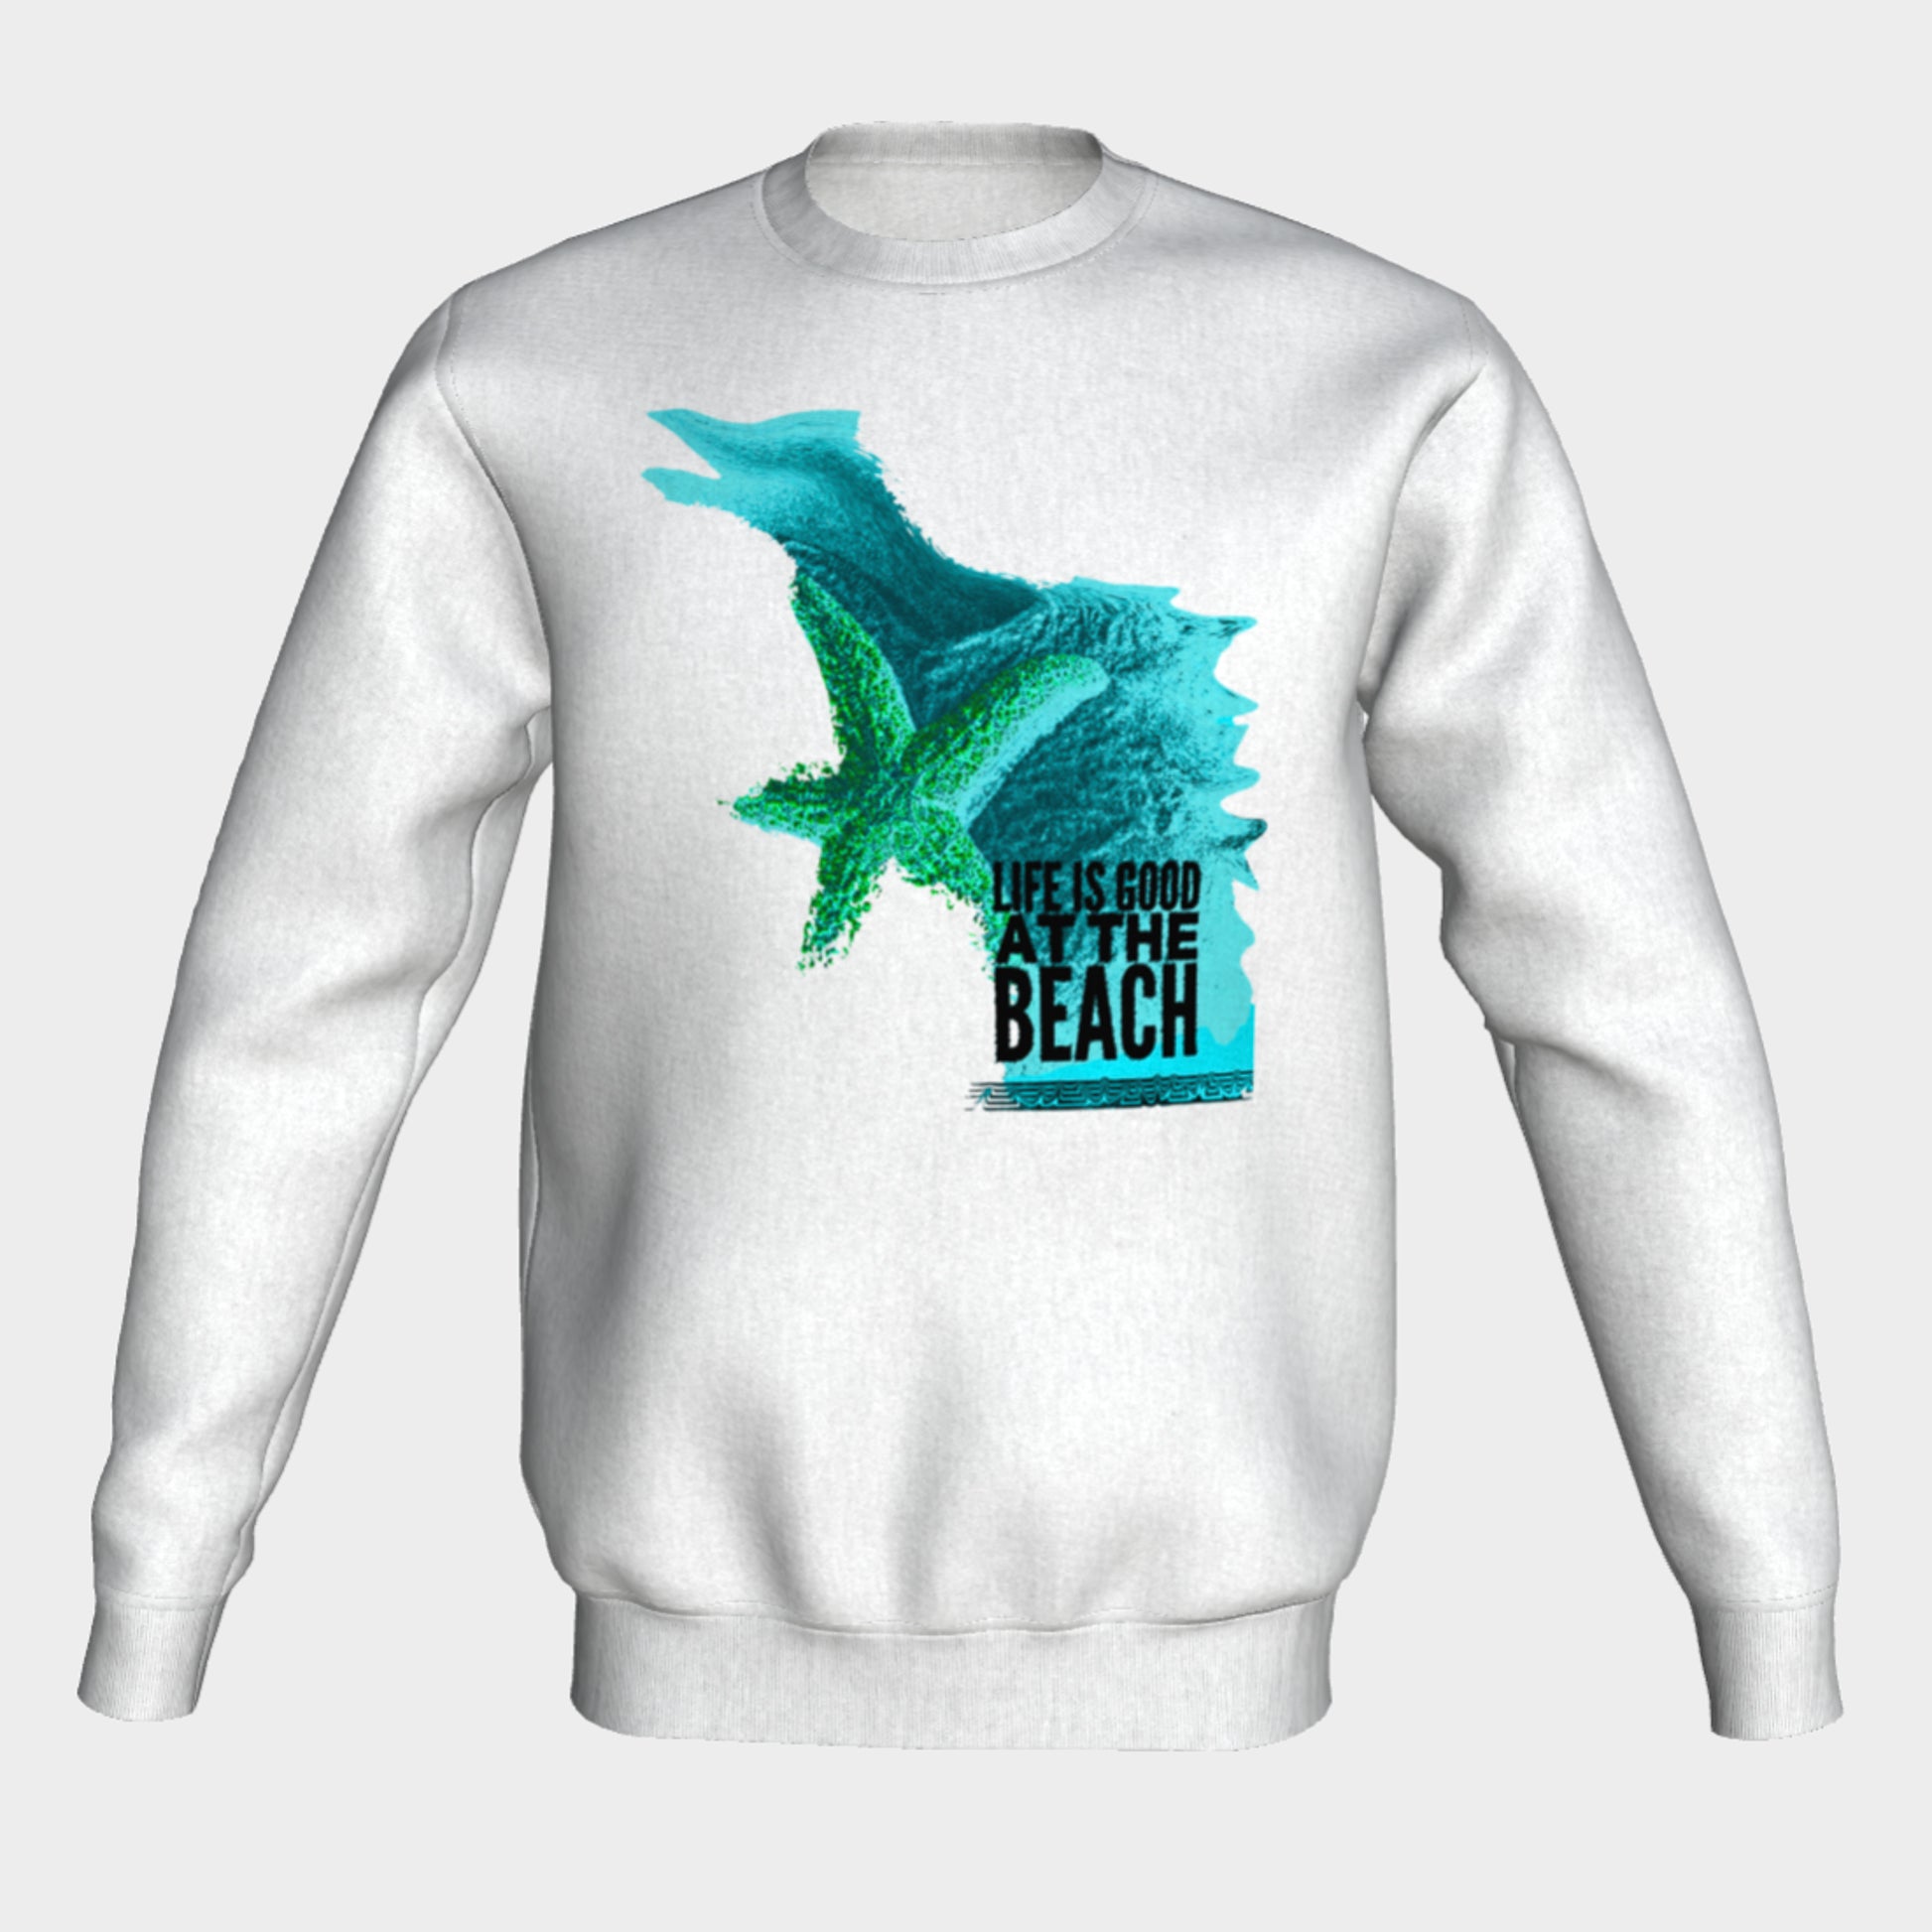 Life Is Good at The Beach Crewneck Sweatshirt What’s better than a super cozy sweatshirt? A super cozy sweatshirt from Van Isle Goddess!  Super cozy unisex sweatshirt for those chilly days.  Excellent for men or women.   Fit is roomy and comfortable. 